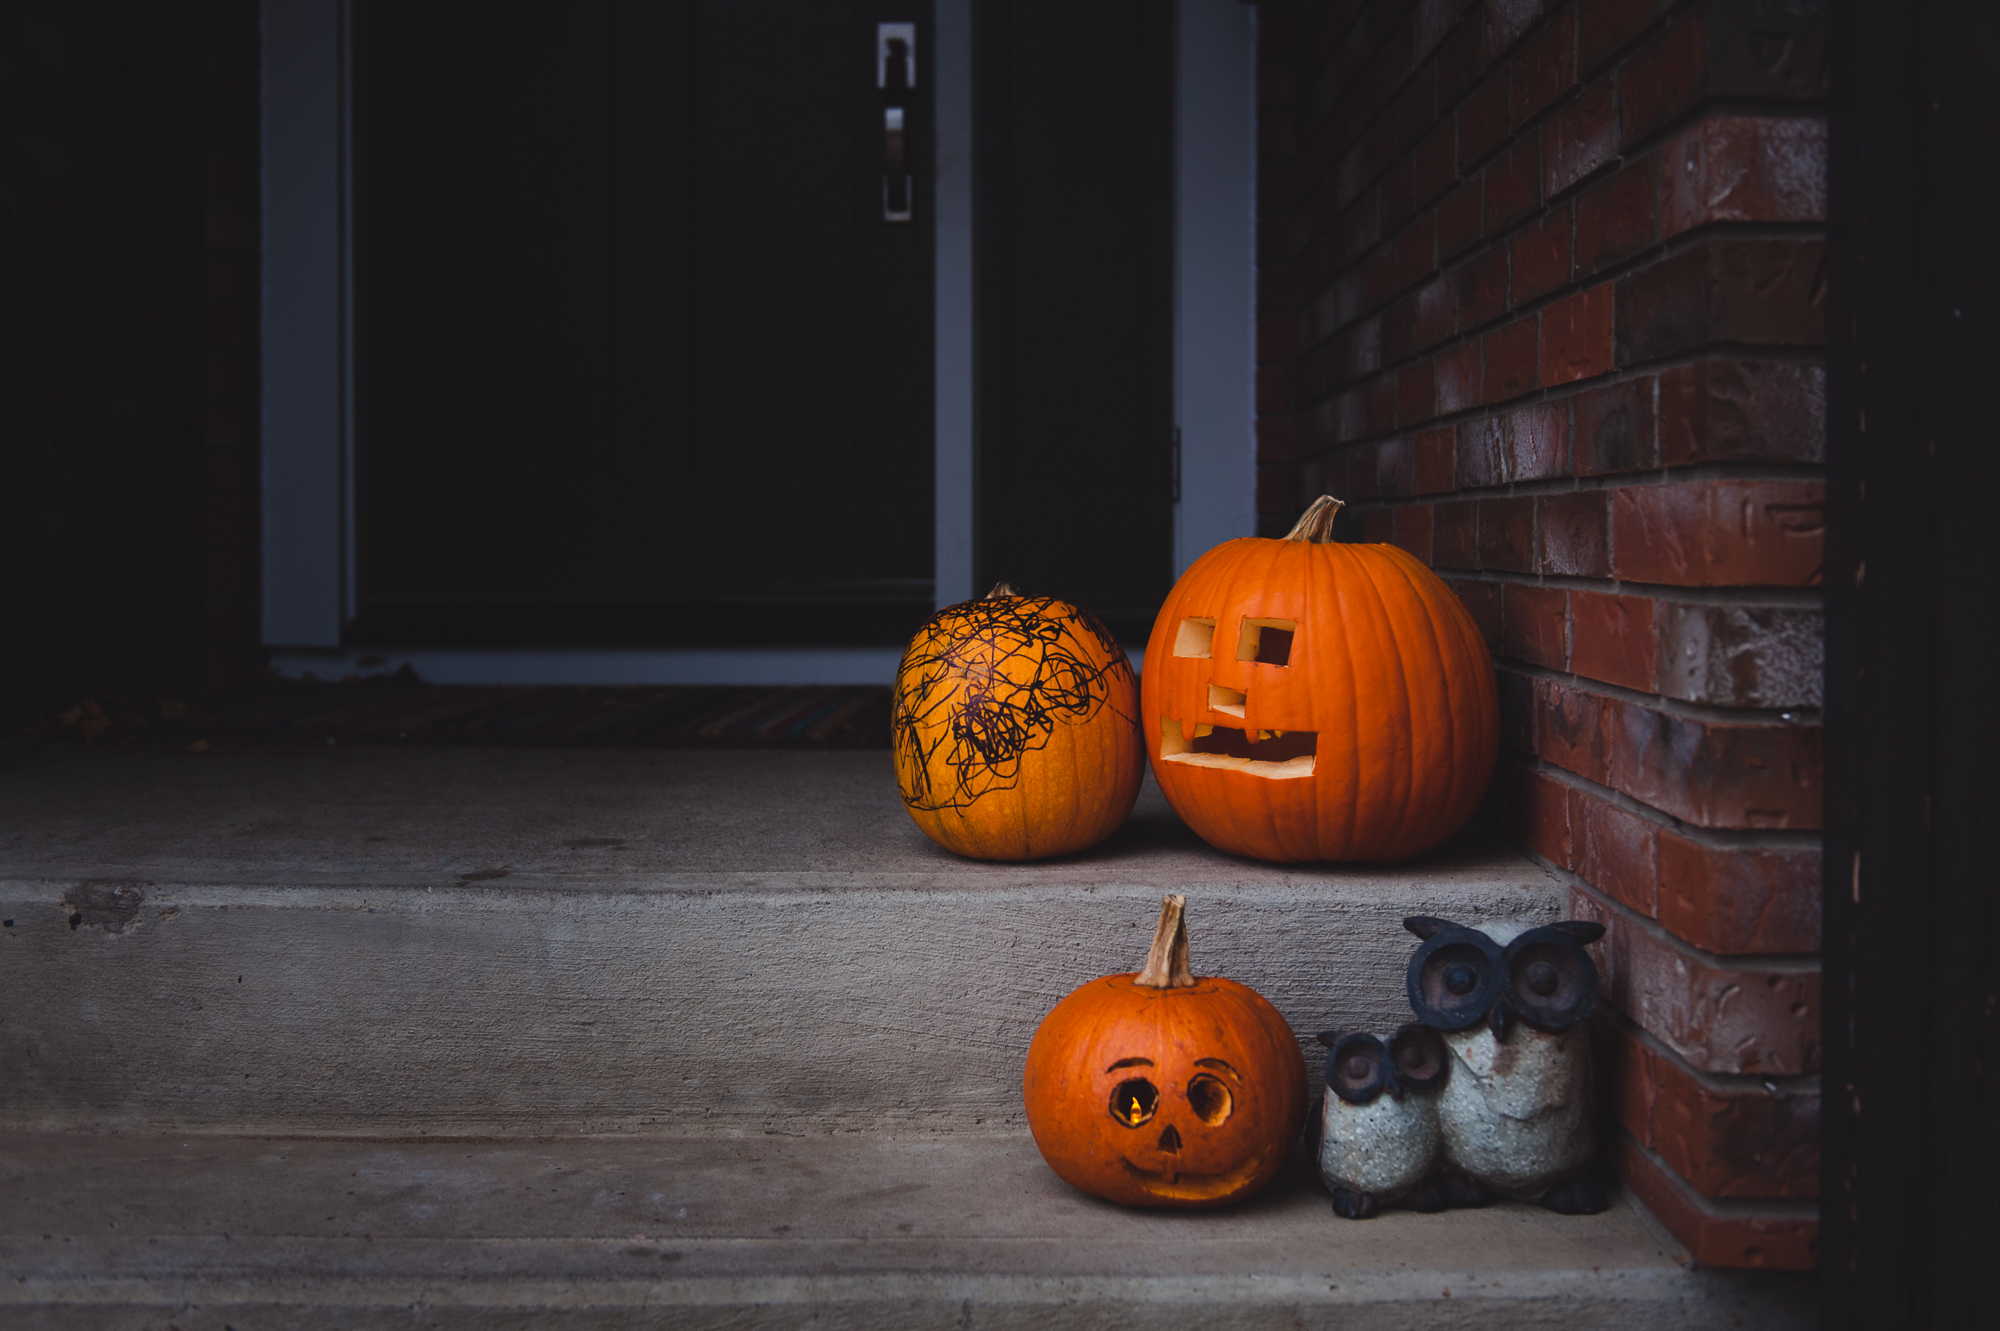 Halloween Photo Tips. How to capture your fun night authentically